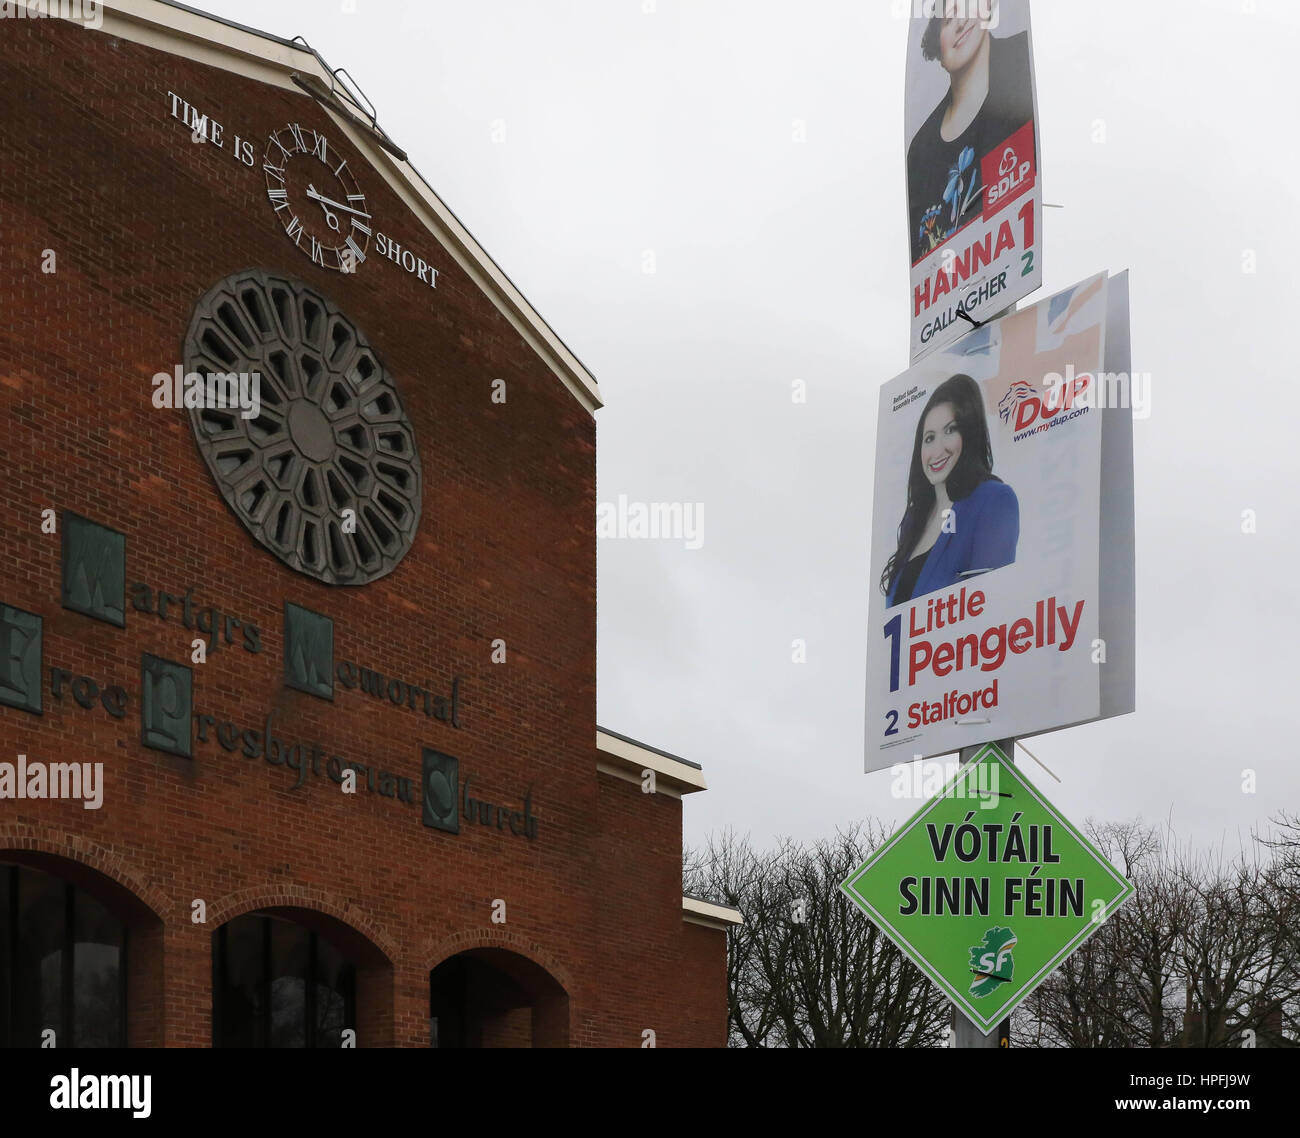 Belfast, Northern Ireland. 21st Feb, 2017. A grey day in South Belfast with election posters providing some colour. With only nine days to go until the Northern Ireland Assembly elections 2017 'Time is short' as the motto on the late Ian Paisley's former church states. Credit: David Hunter/Alamy Live News Stock Photo